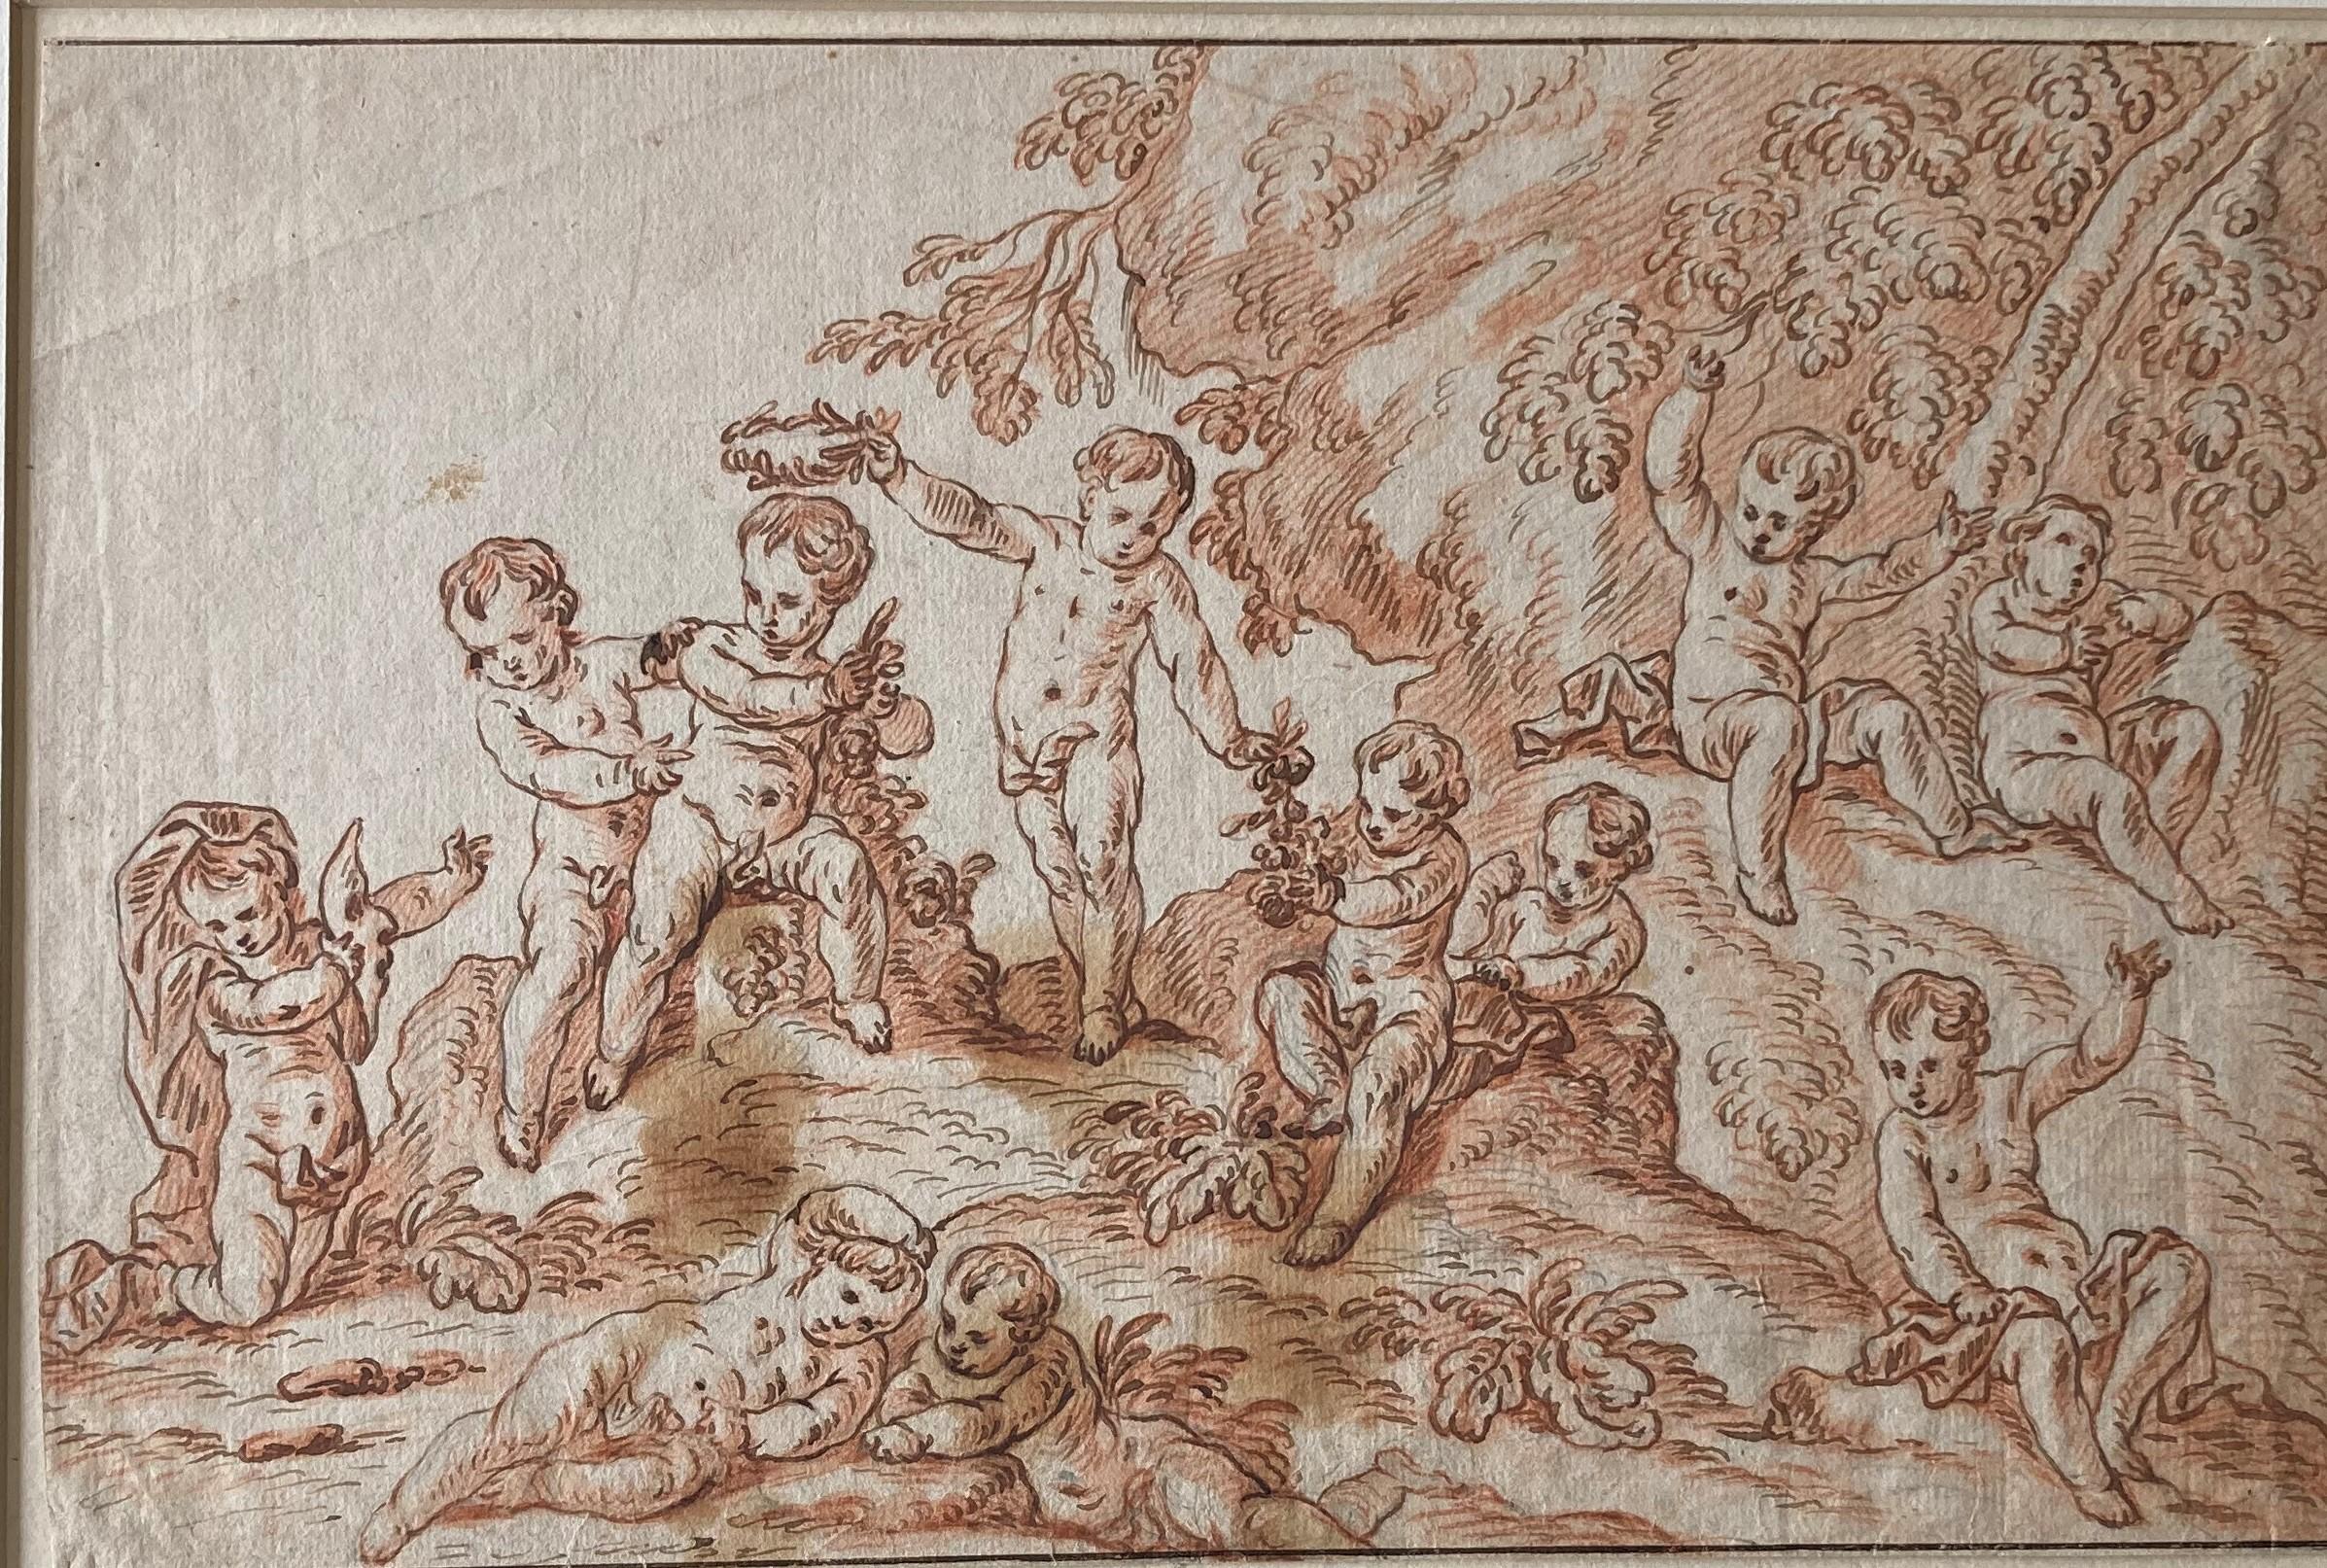 Pierre Berchet, Drawing of Putti playing in a landscape,
Painter of decorative history subjects; trained under La Fosse; worked in France and during the 1690s in Britain; executed the ceiling painting for Chapel of Trinity College, Oxford,